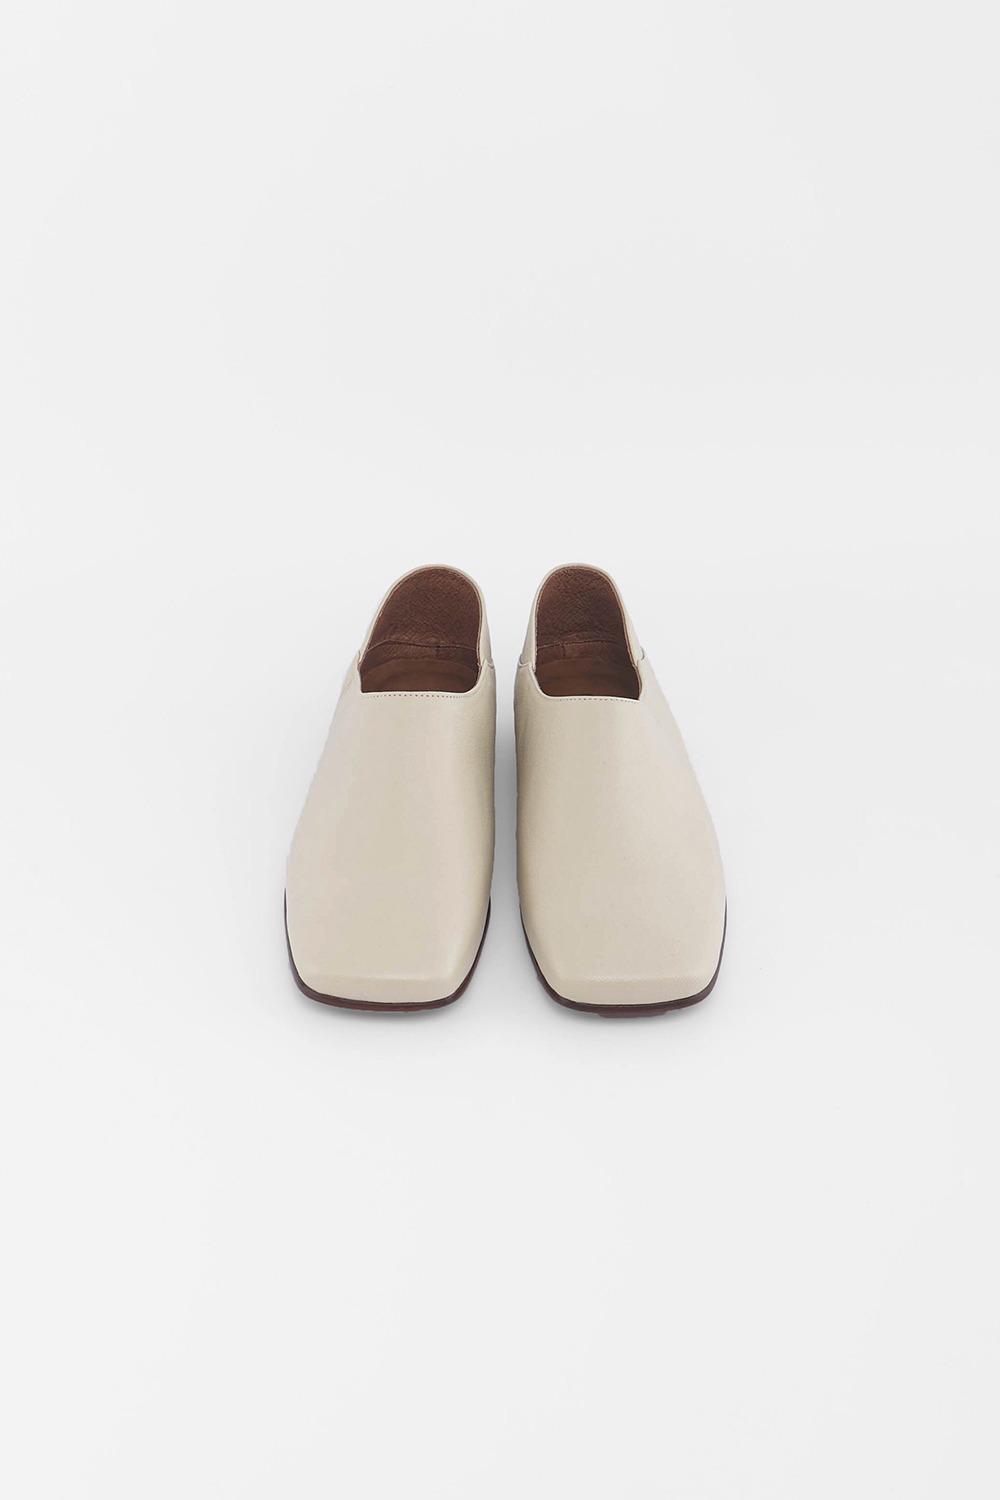 MINIMAL Italy Leather Fold-Back Loafers_Cream